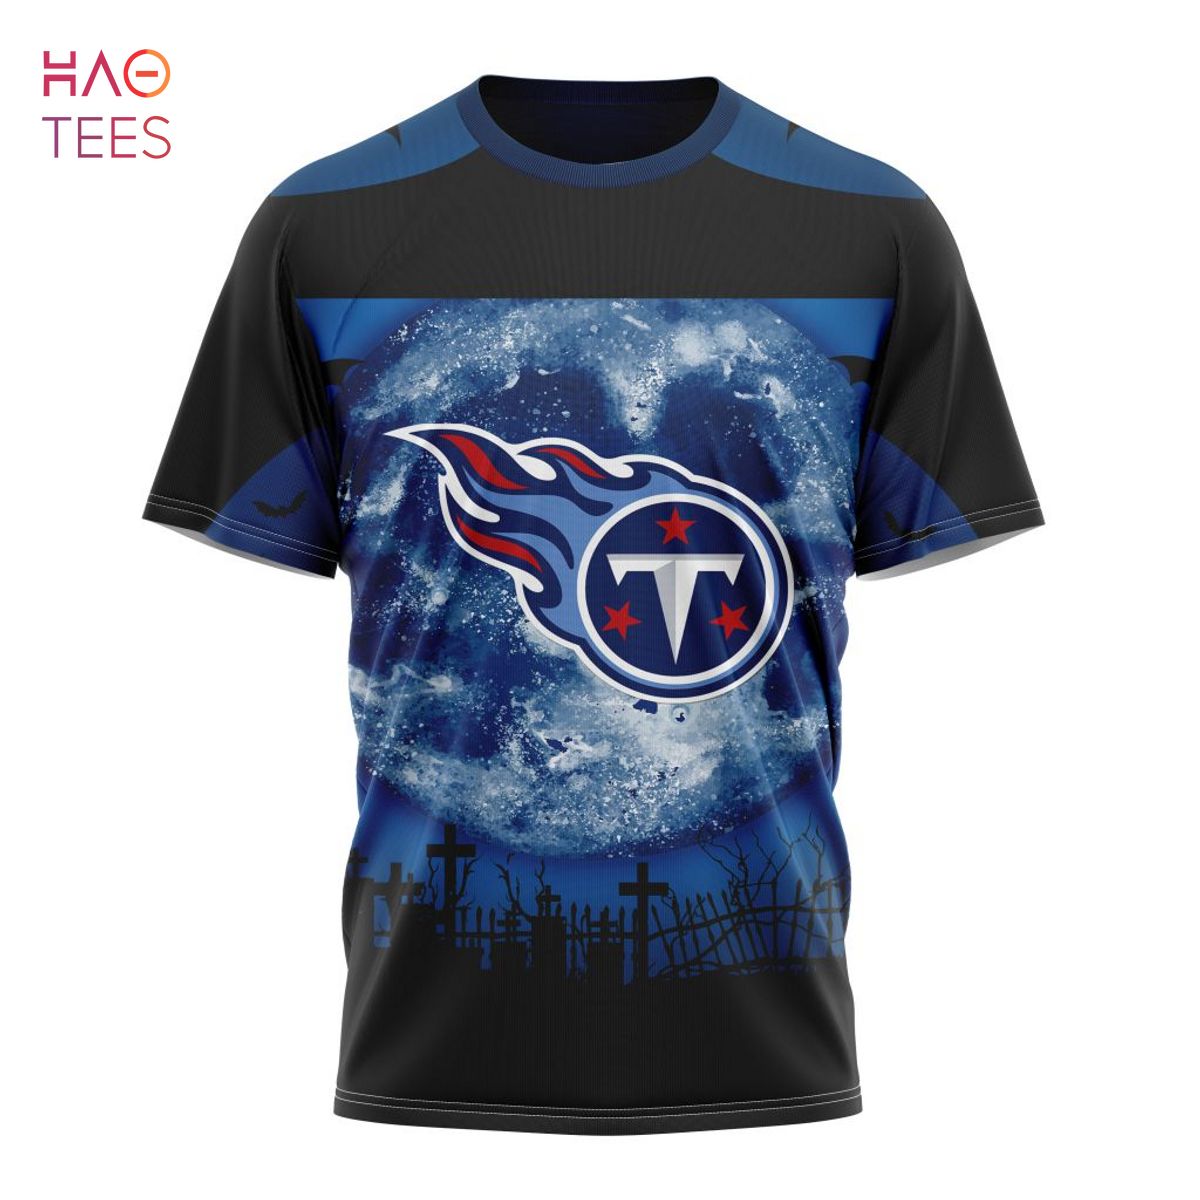 BEST NFL Tennessee Titans, Specialized Halloween Concepts Kits 3D Hoodie